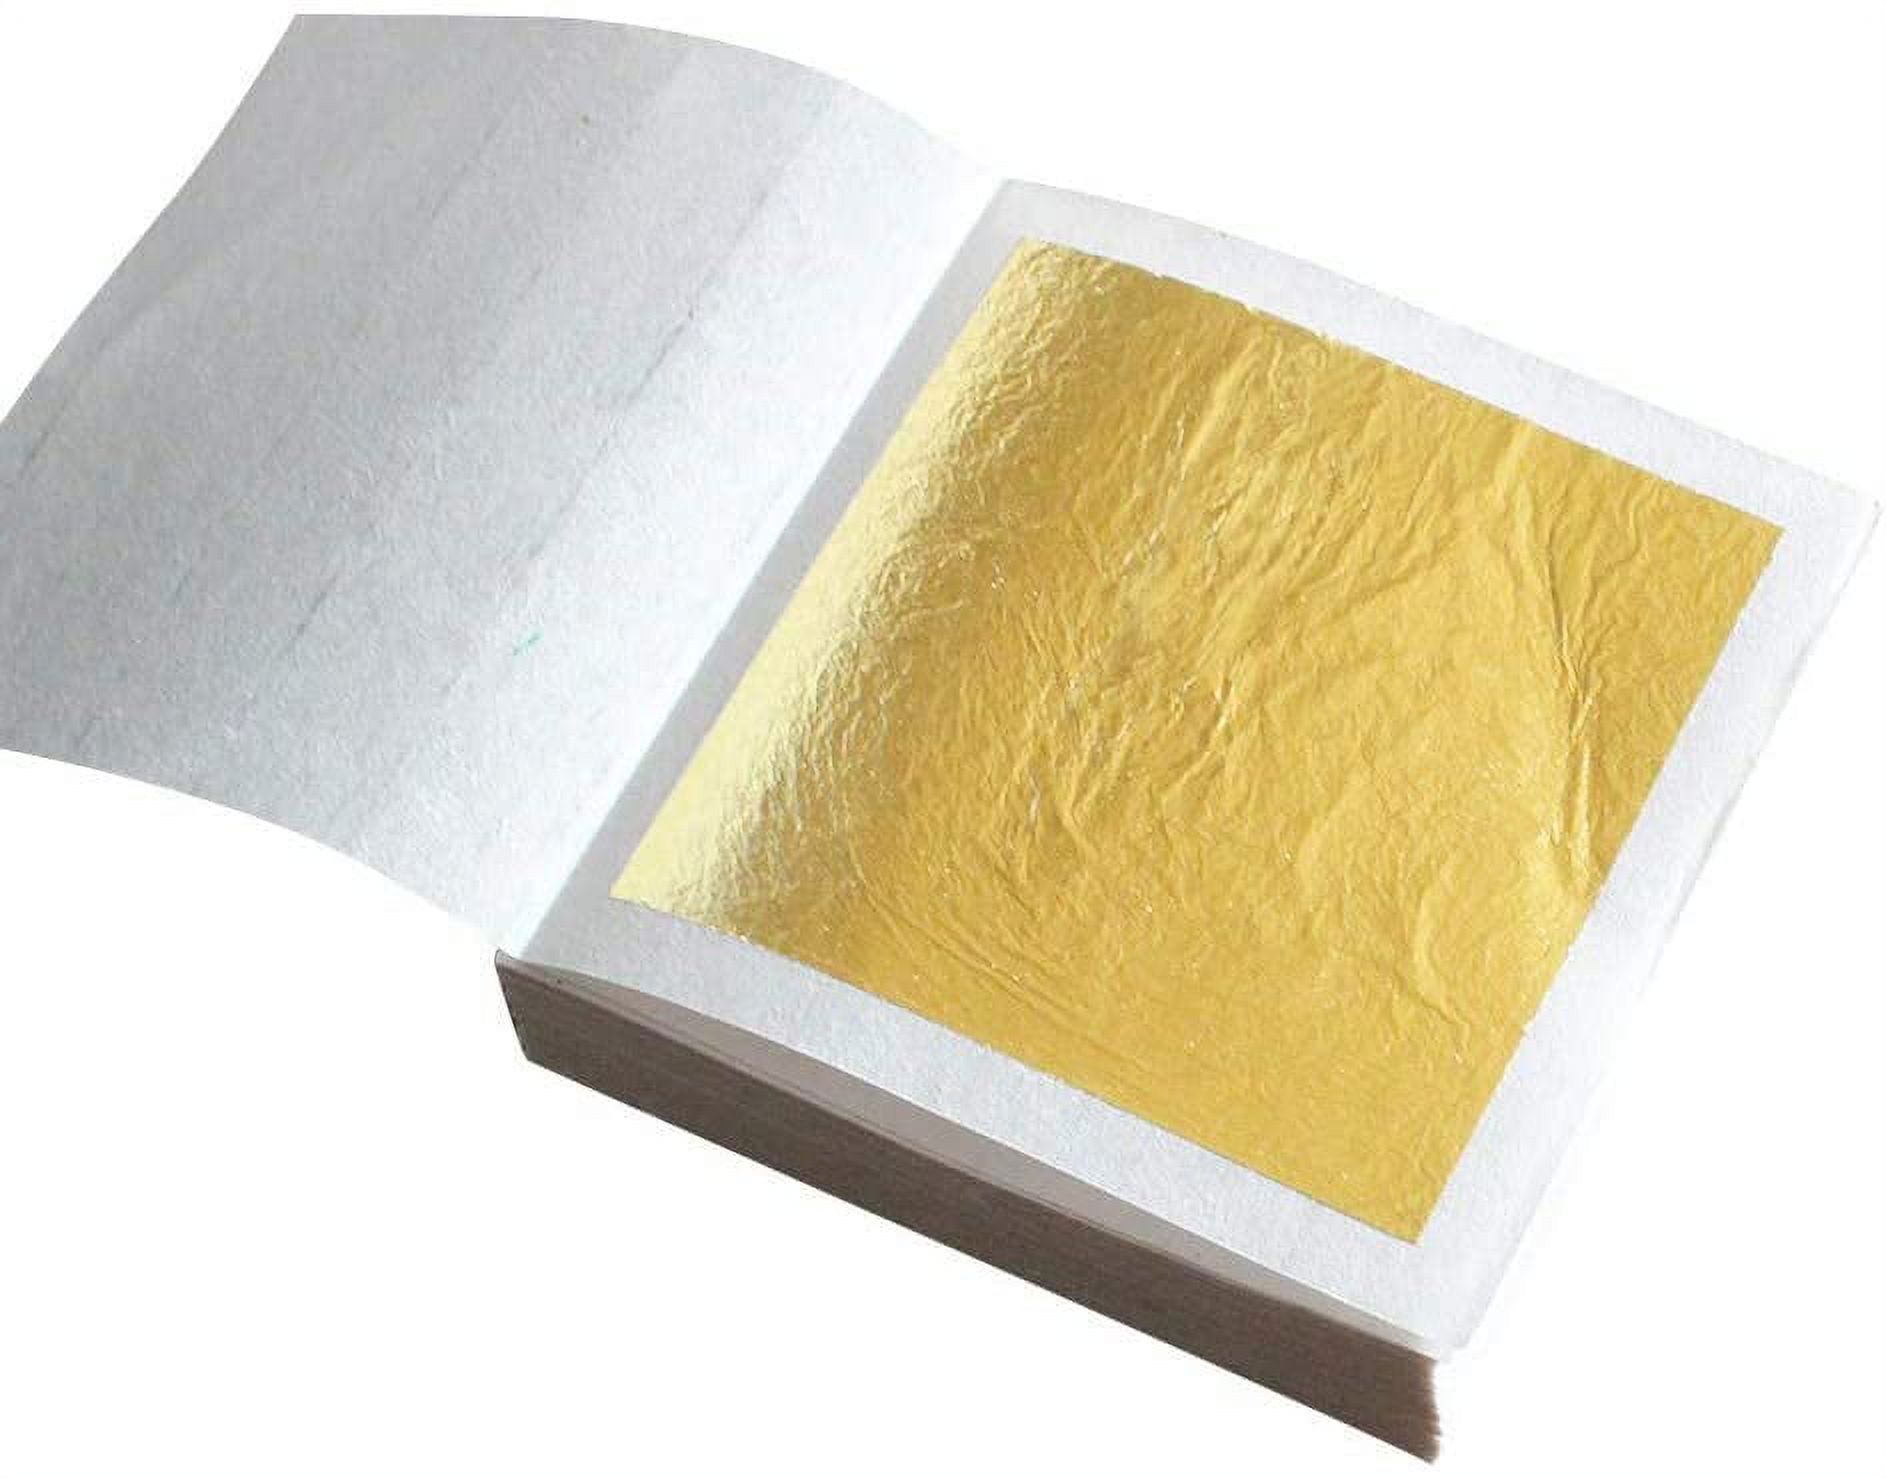 Velocity 100pcs Edible 24K Gold Foil Leaf Sheets,Real Gold Leaf Leafing Sheets Foil Paper for Cake Chocolates Decorating Bakery Pastry Cooking Routine Makeup